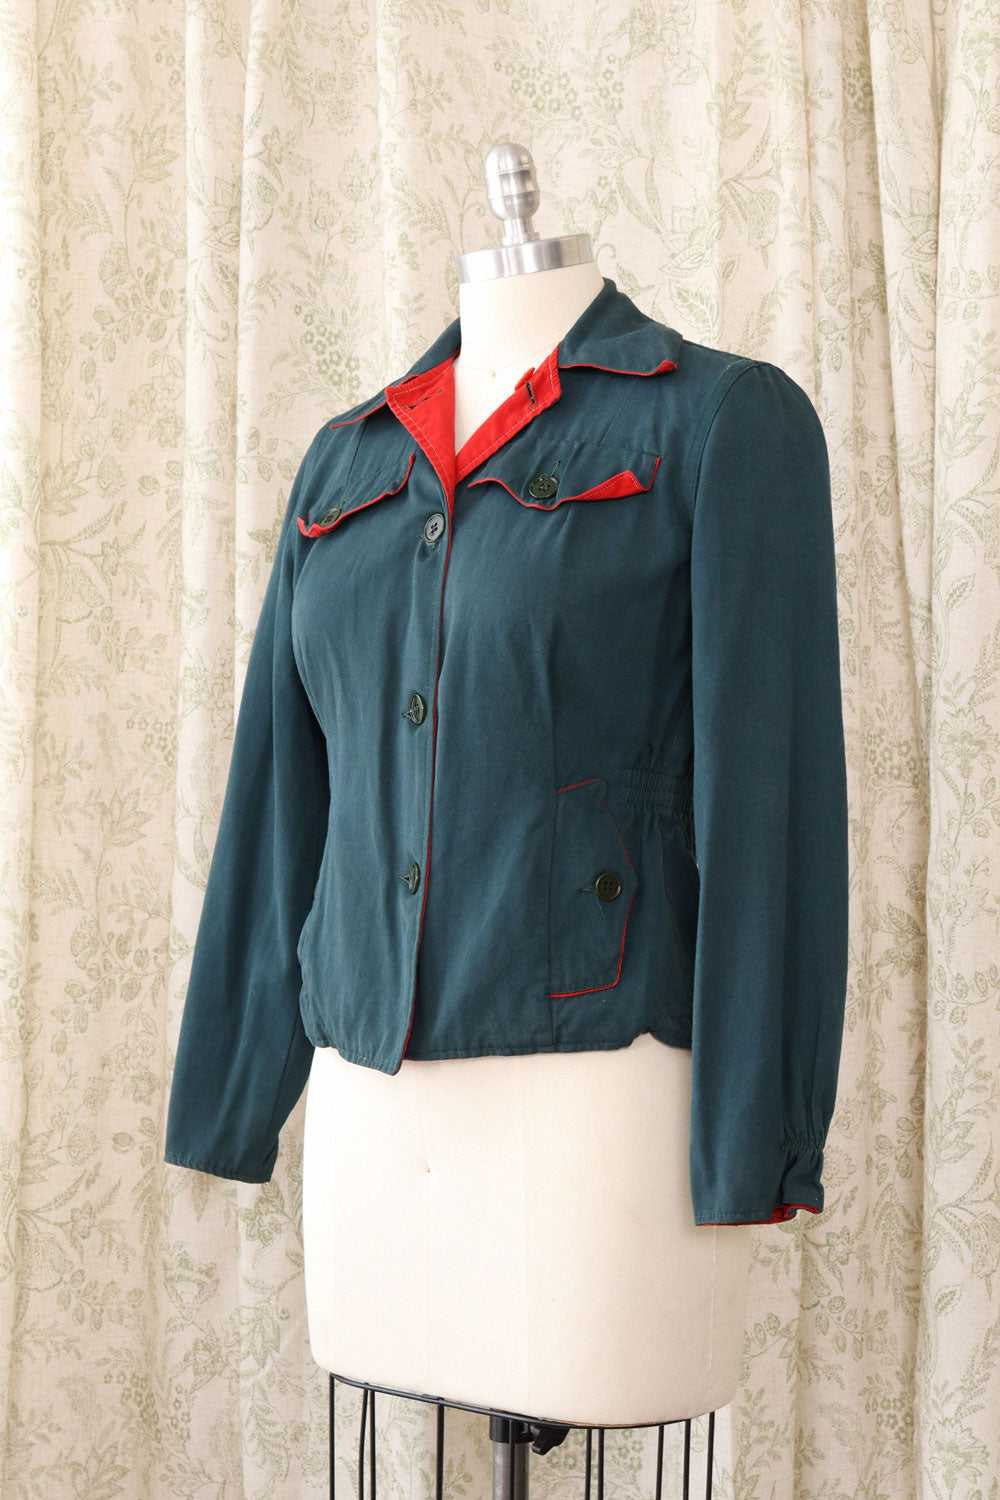 Reversible Red/Green Cropped Jacket XS/S - image 7